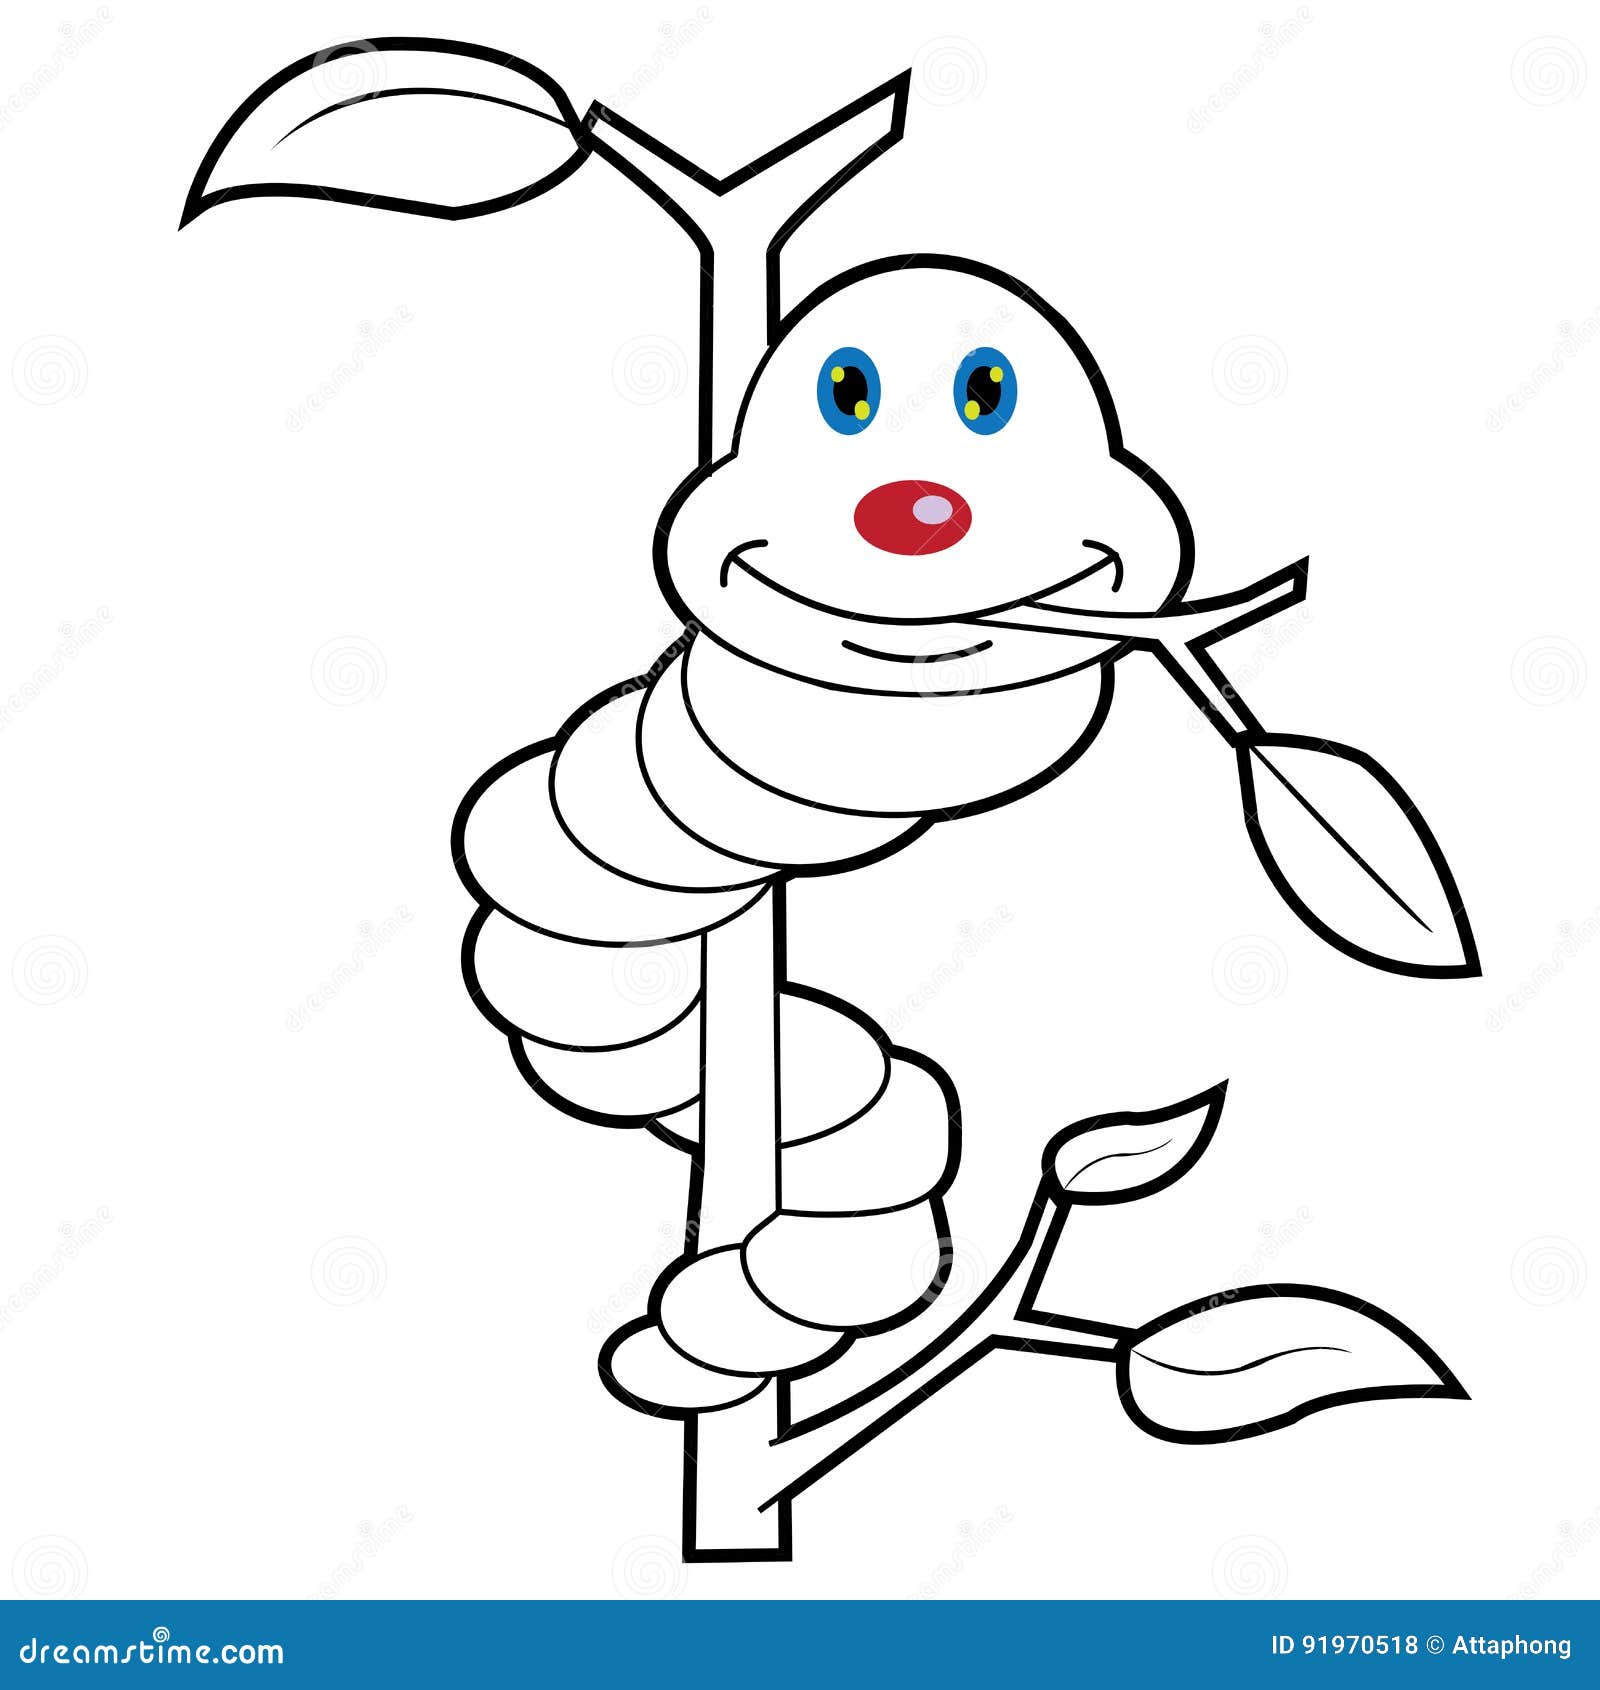 larva worm and apple cartoon coloring page for toddle